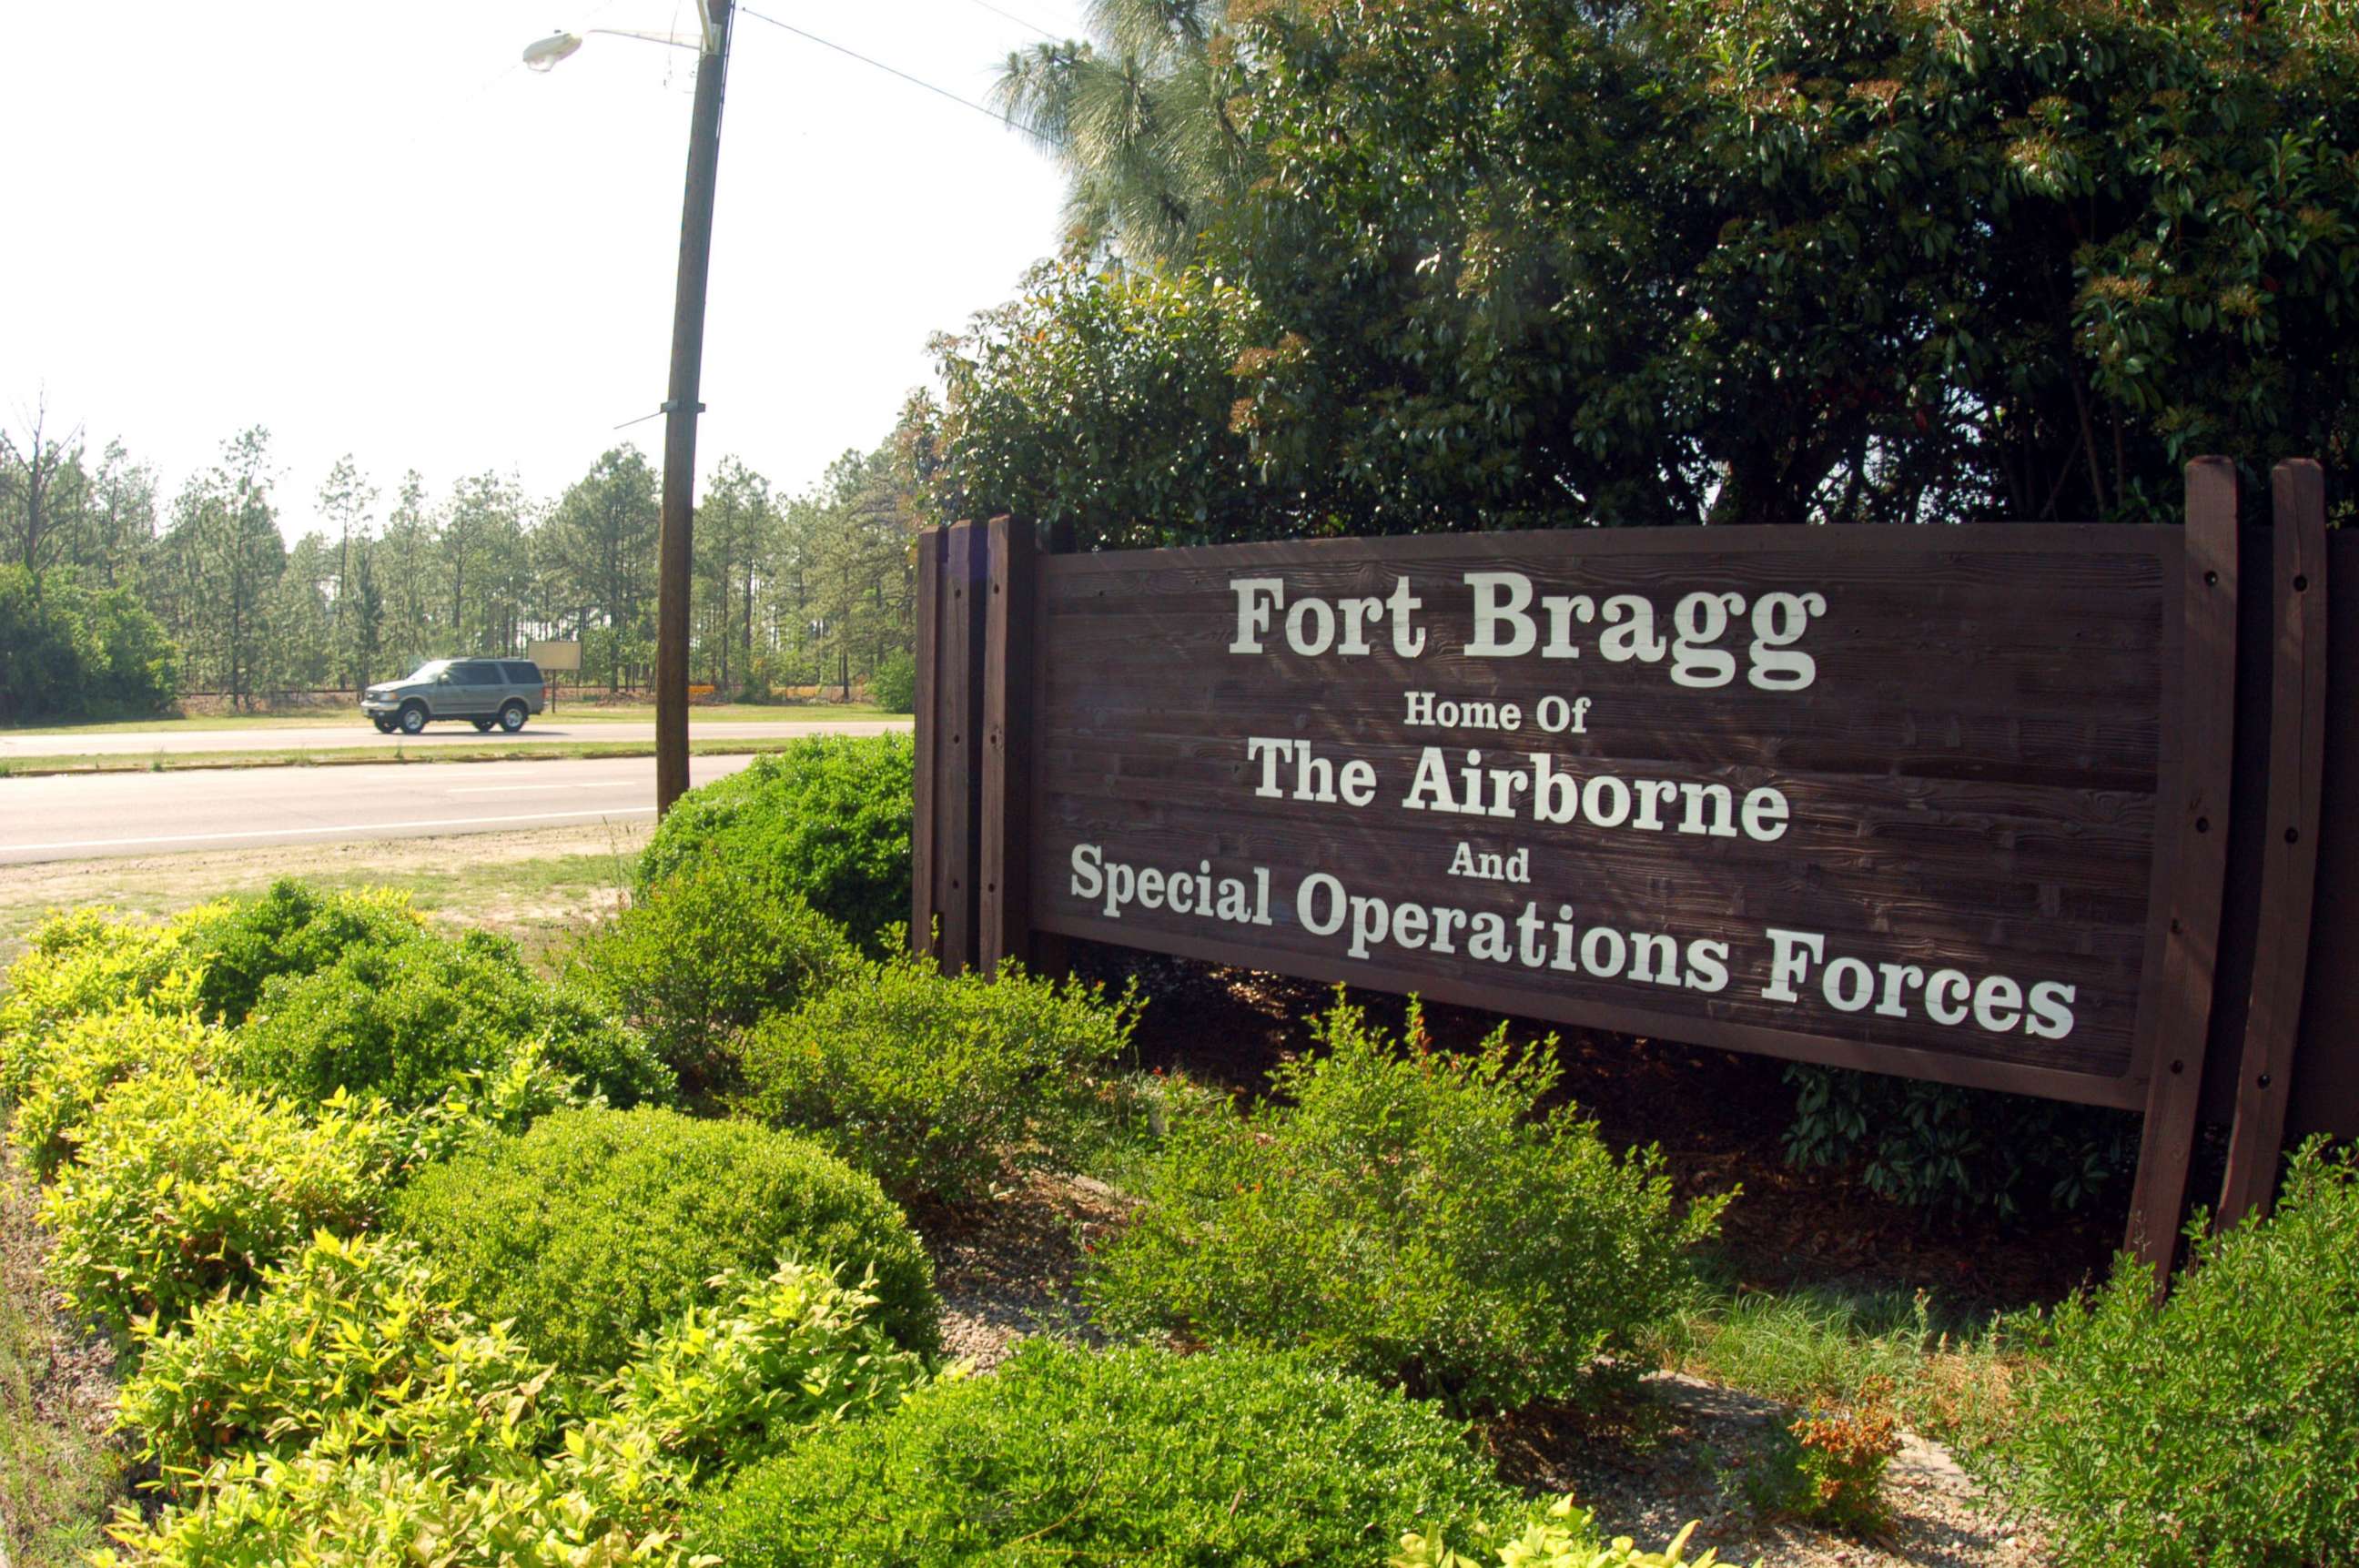 PHOTO: A sign shows Fort Bragg information, May 13, 2004 in Fayettville, North Carolina.